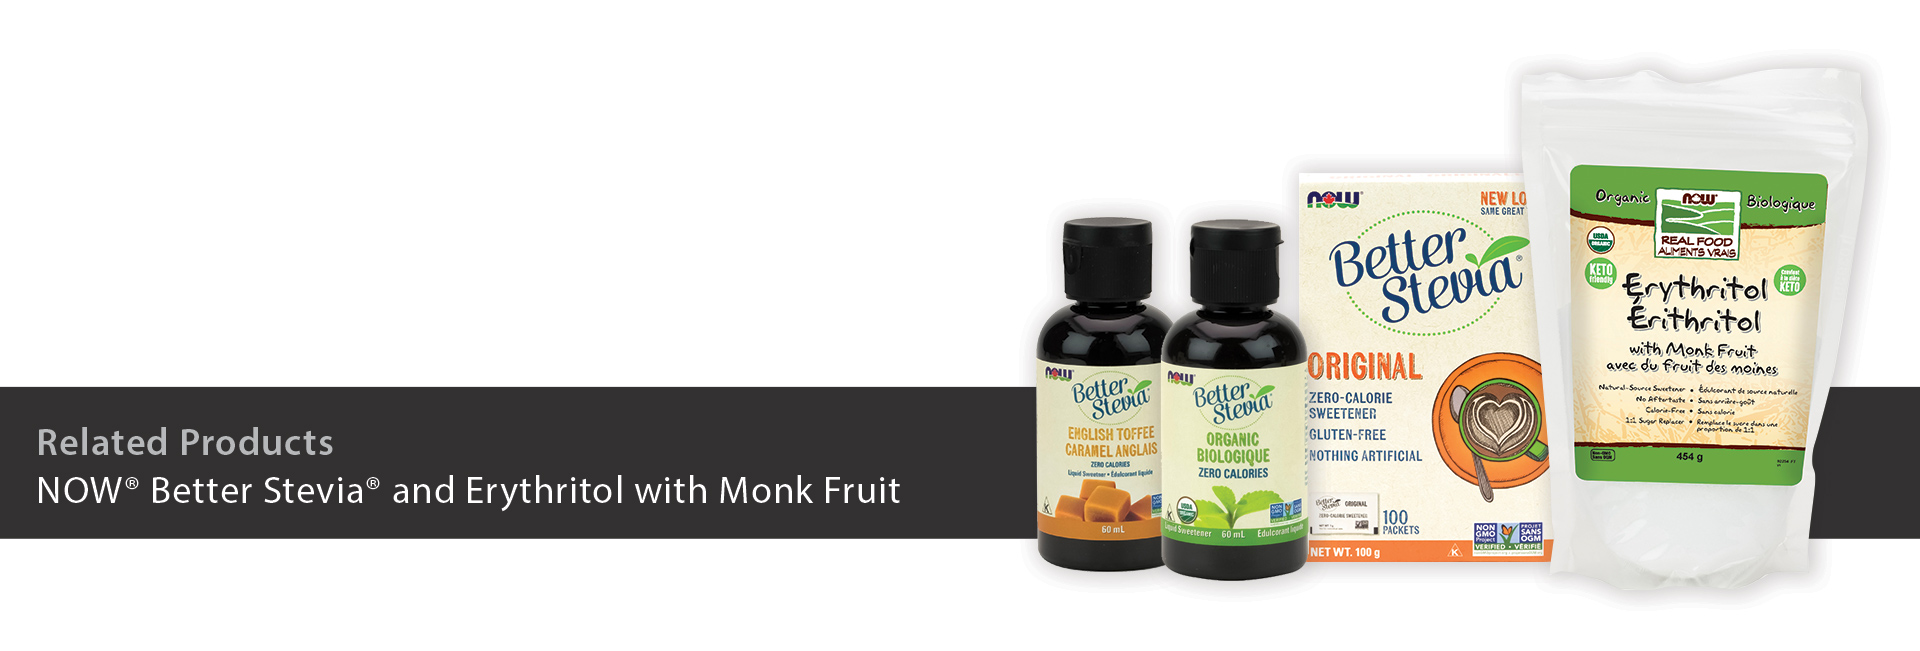 NOW Better Stevia and Erythritol with Monk Fruit